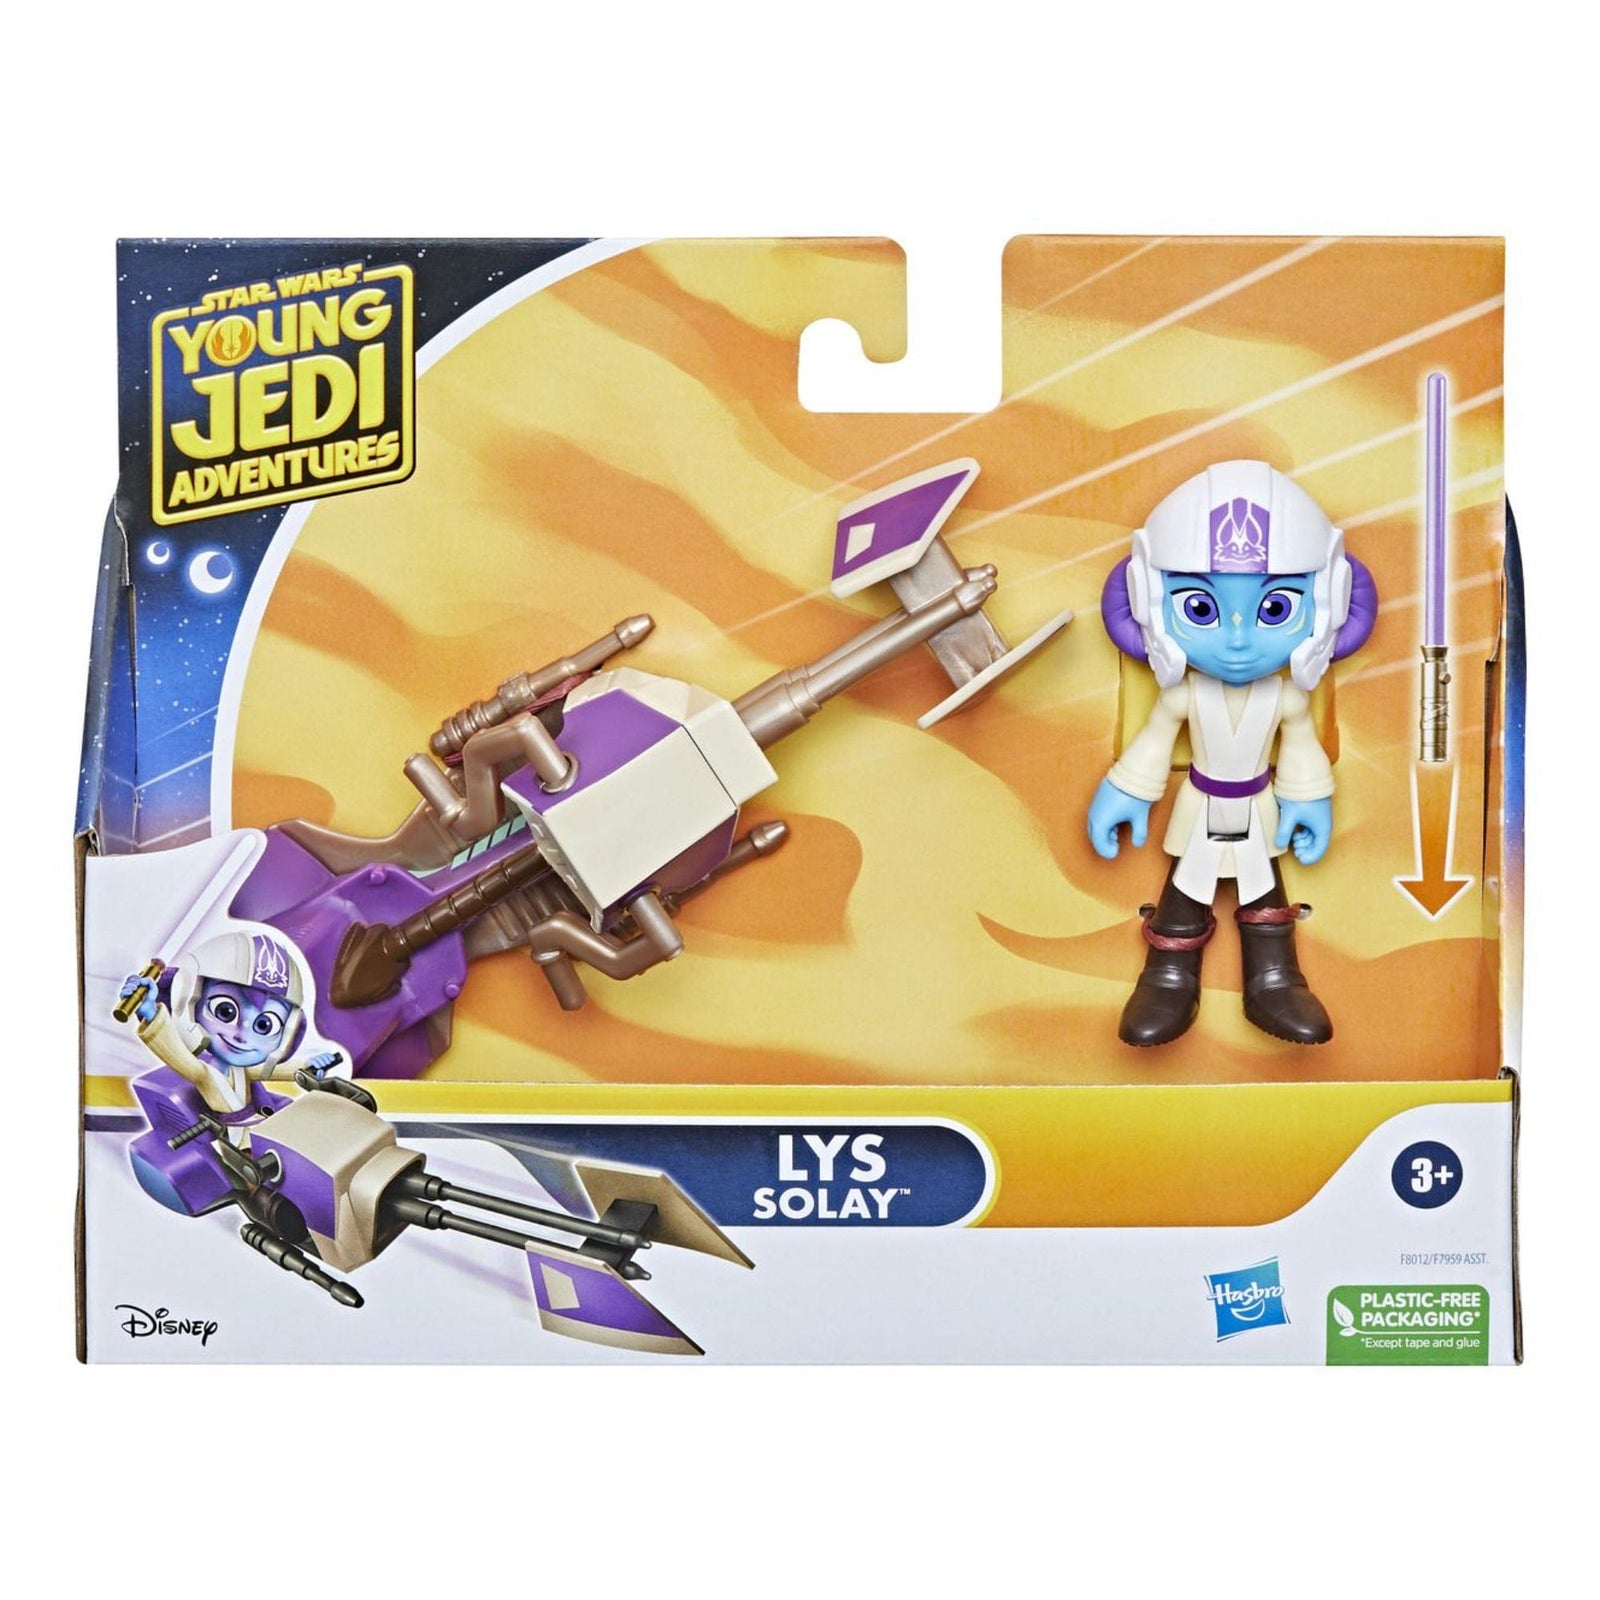 Star Wars Young Jedi Adventures Figure & Vehicle Assorted